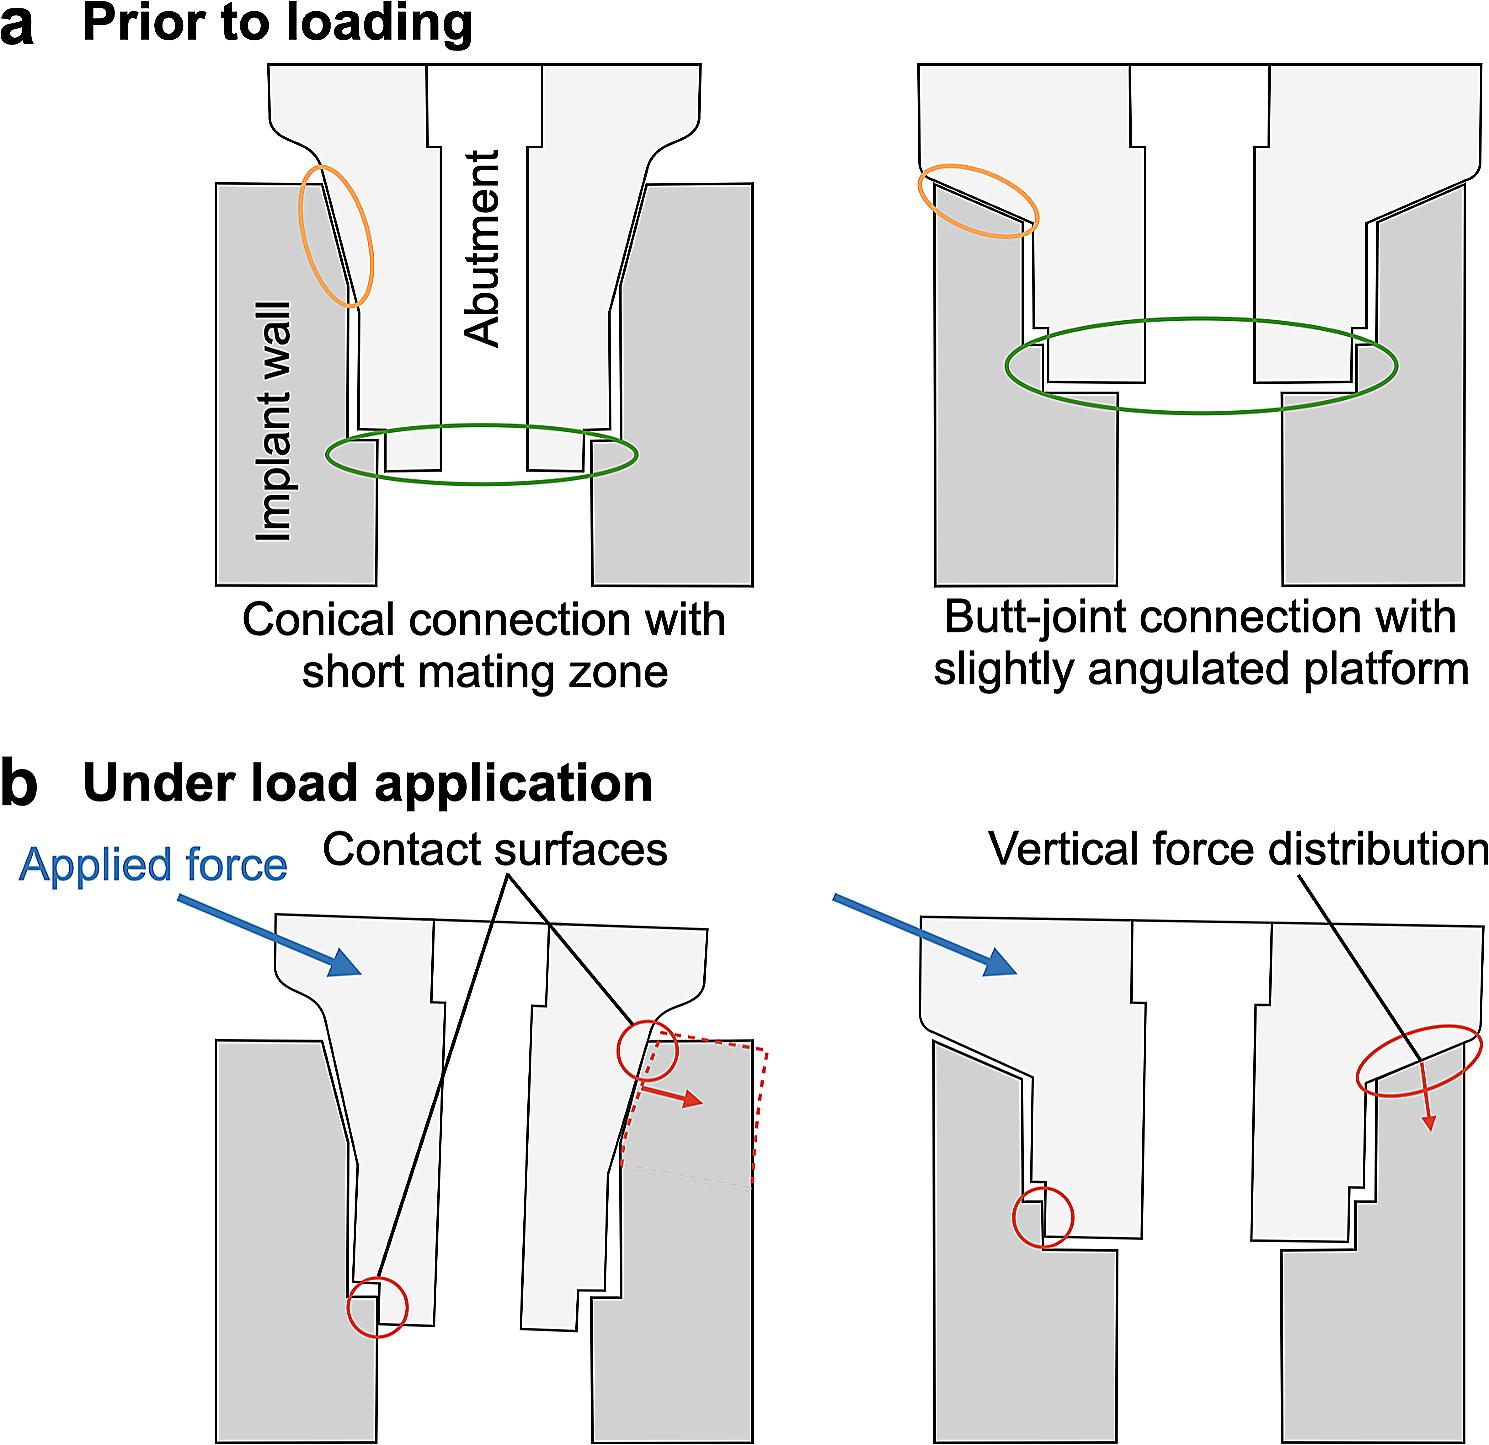 In vitro assessment of internal implant-abutment connections with different cone angles under static loading using synchrotron-based radiation